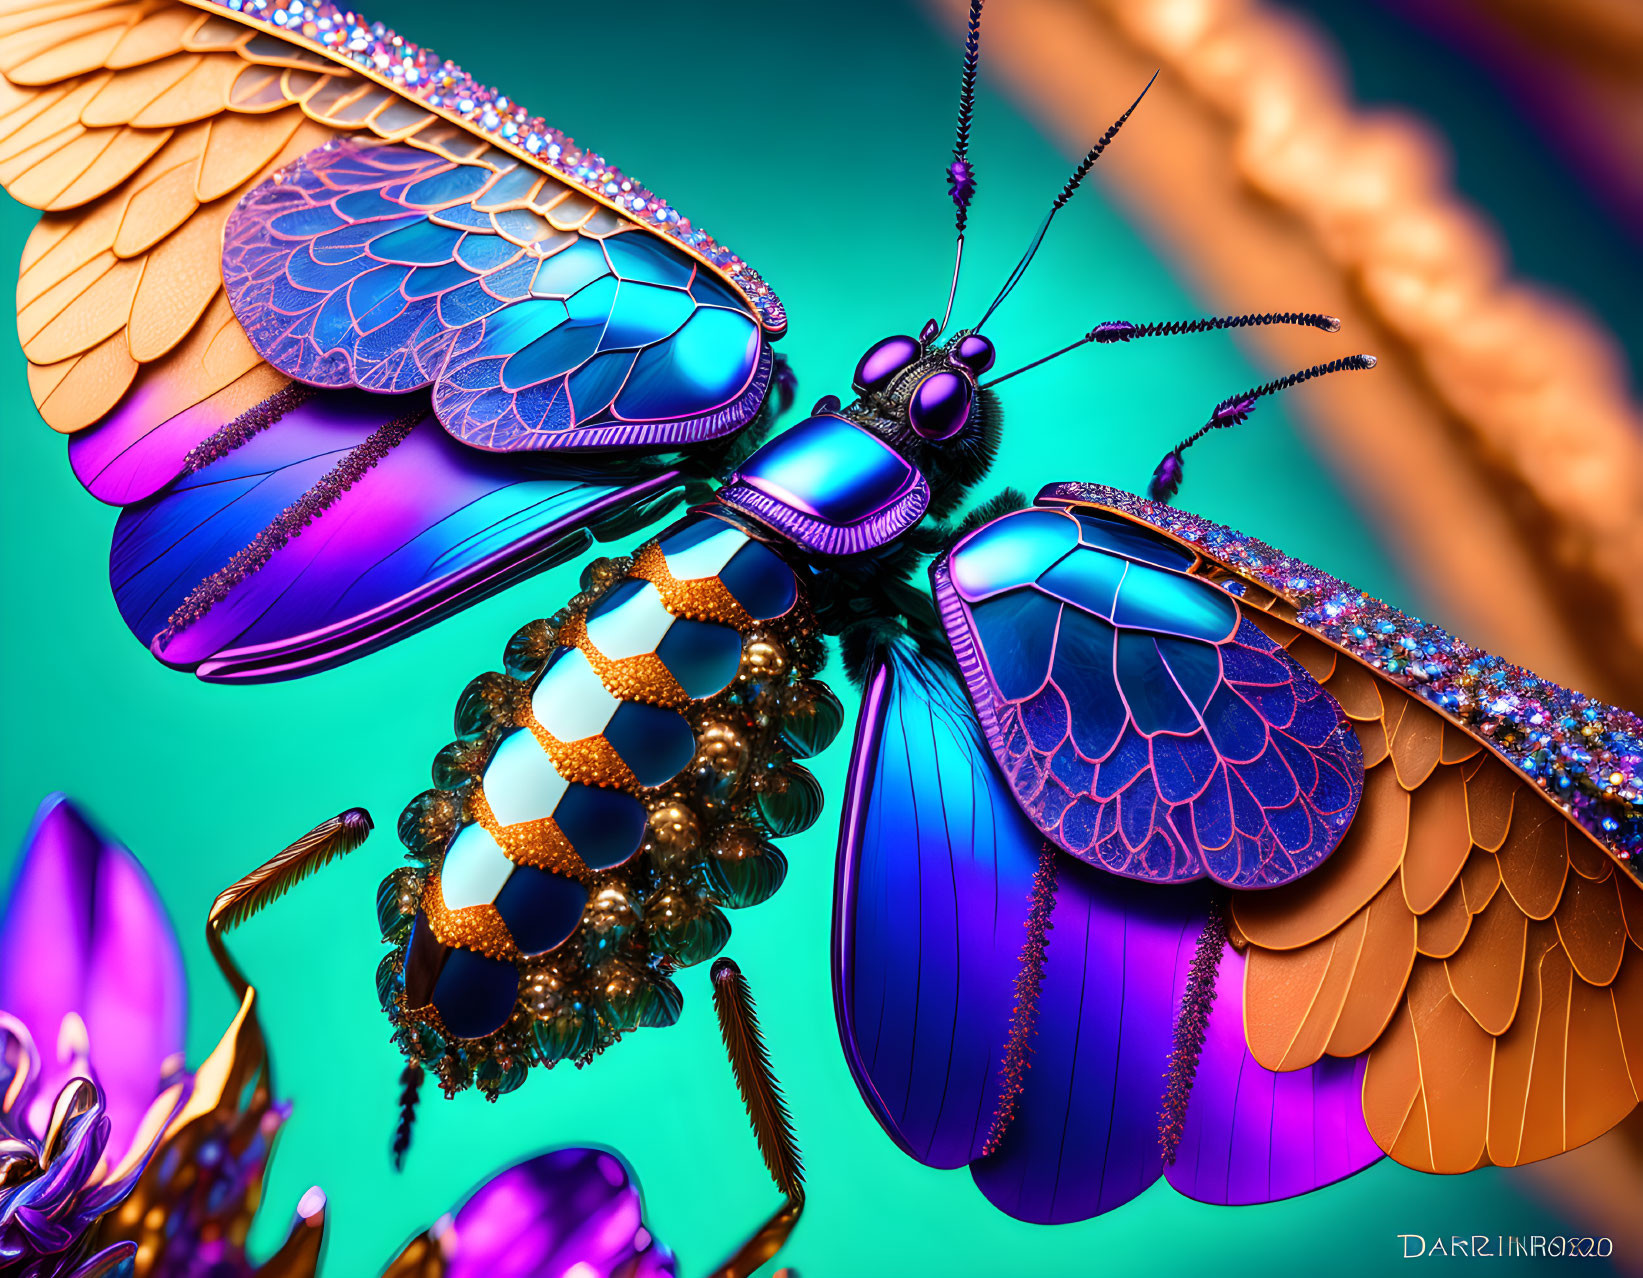 Colorful Jewel Beetle Art with Iridescent Wings on Teal Background